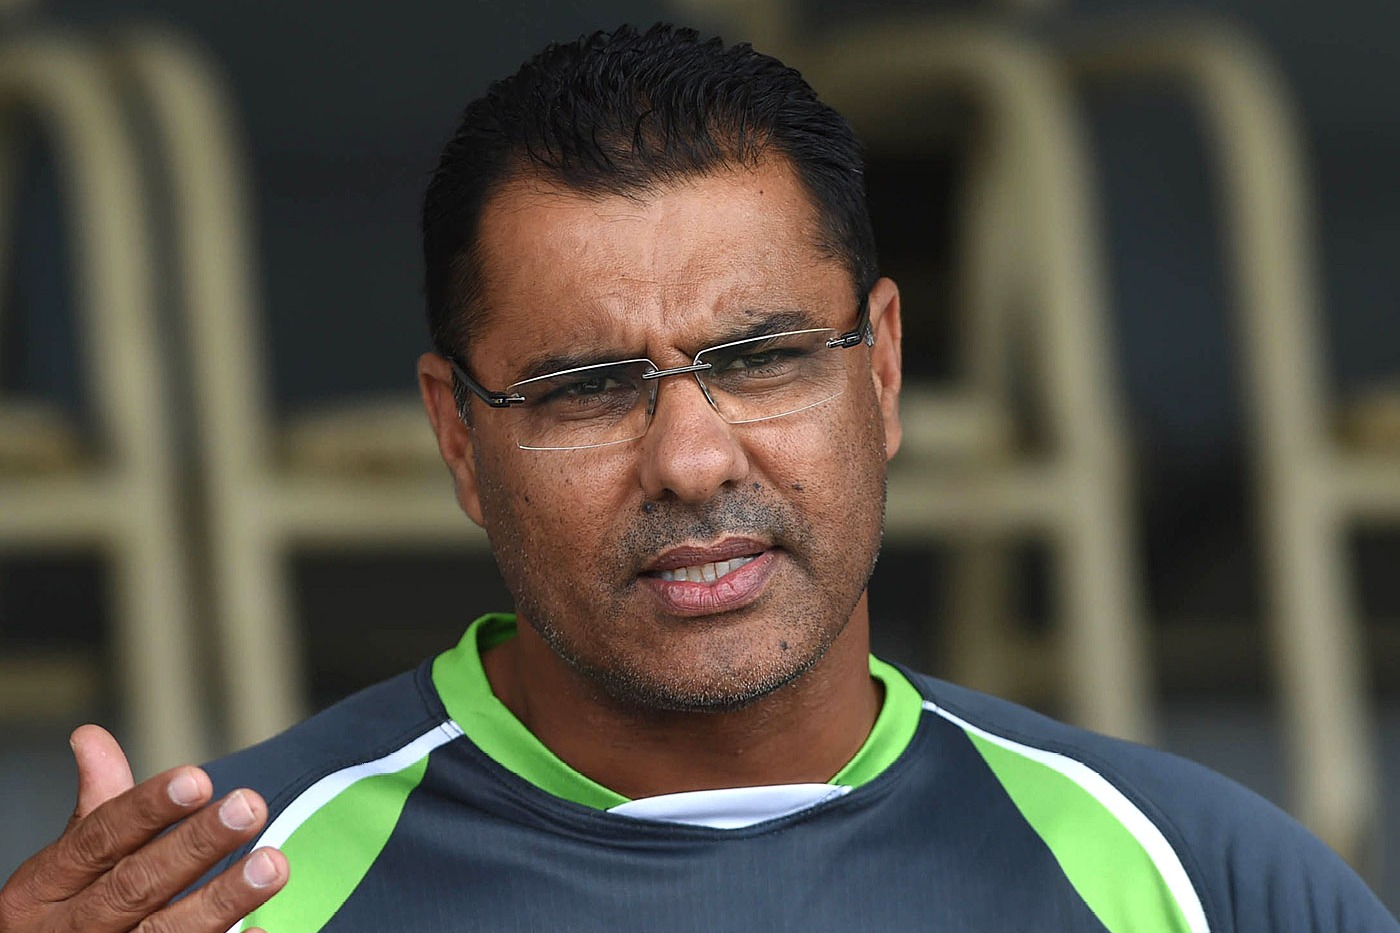 World Test Championship Without India and Pakistan Series Makes No Sense Says Waqar Younis